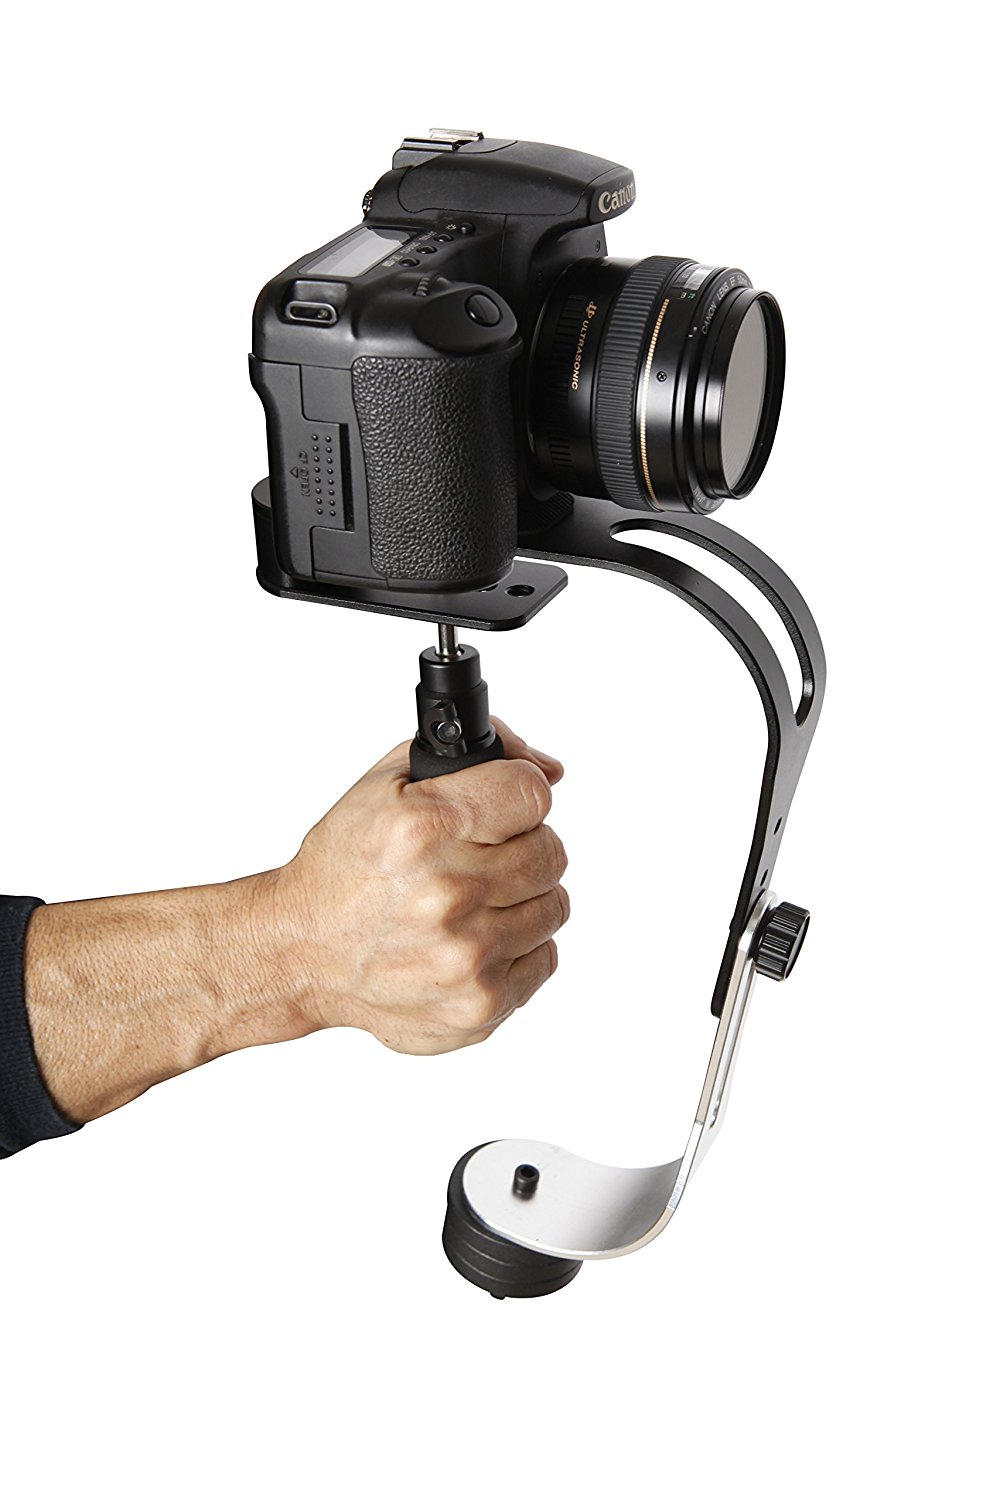 roxant pro gimbal stabilizer, best accessory gifts photographers, best gifts for photographers, best accessories gifts photographers